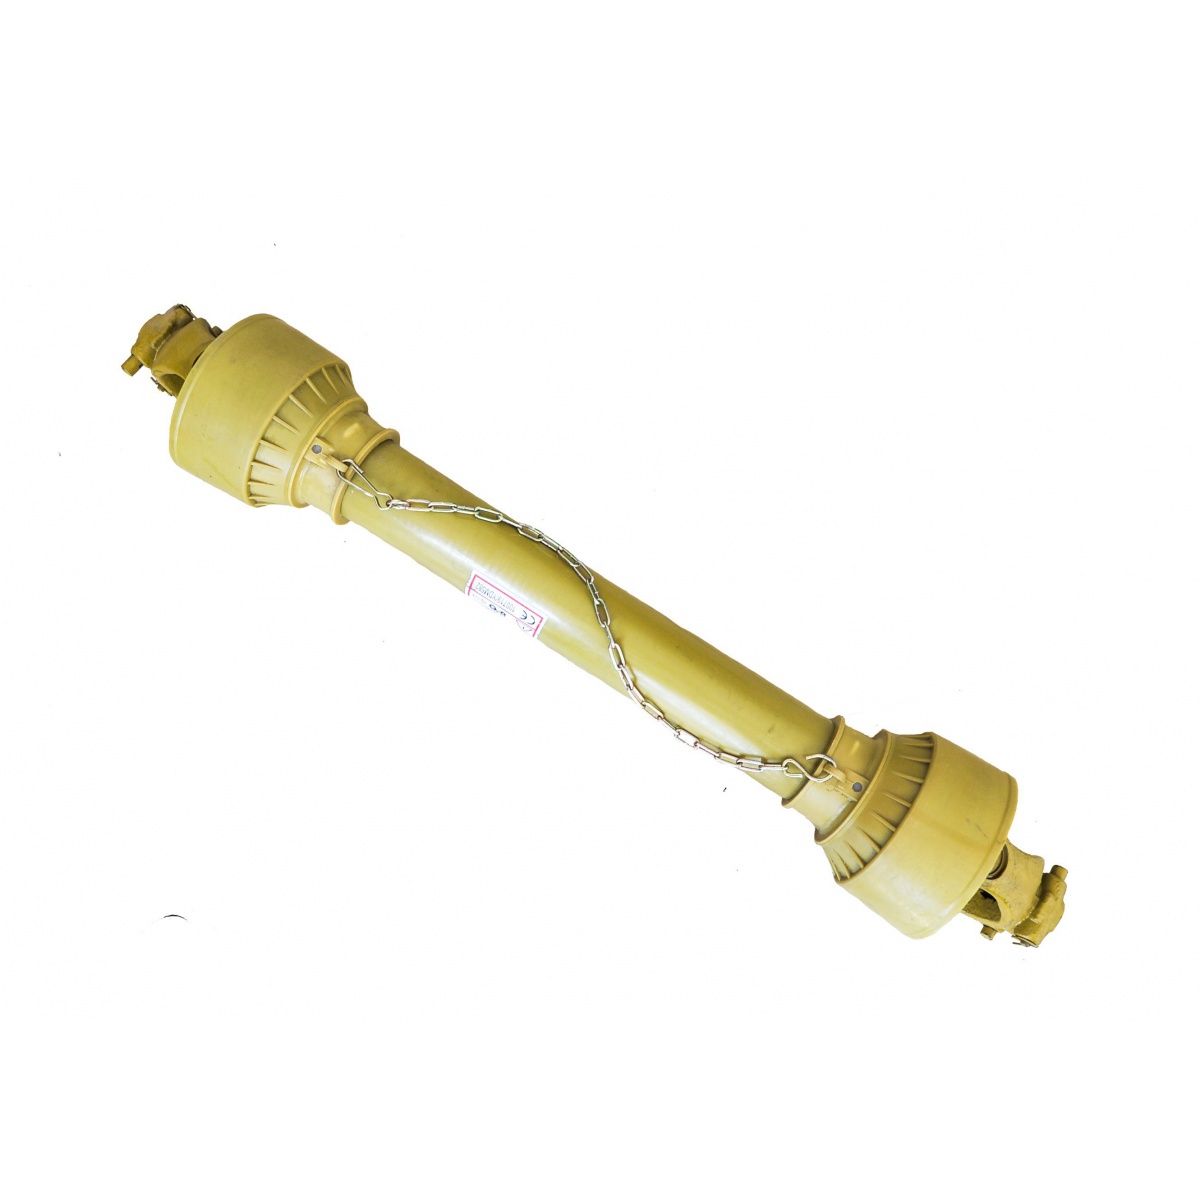 PTO shaft 07B - 110 cm / up to 105 HP